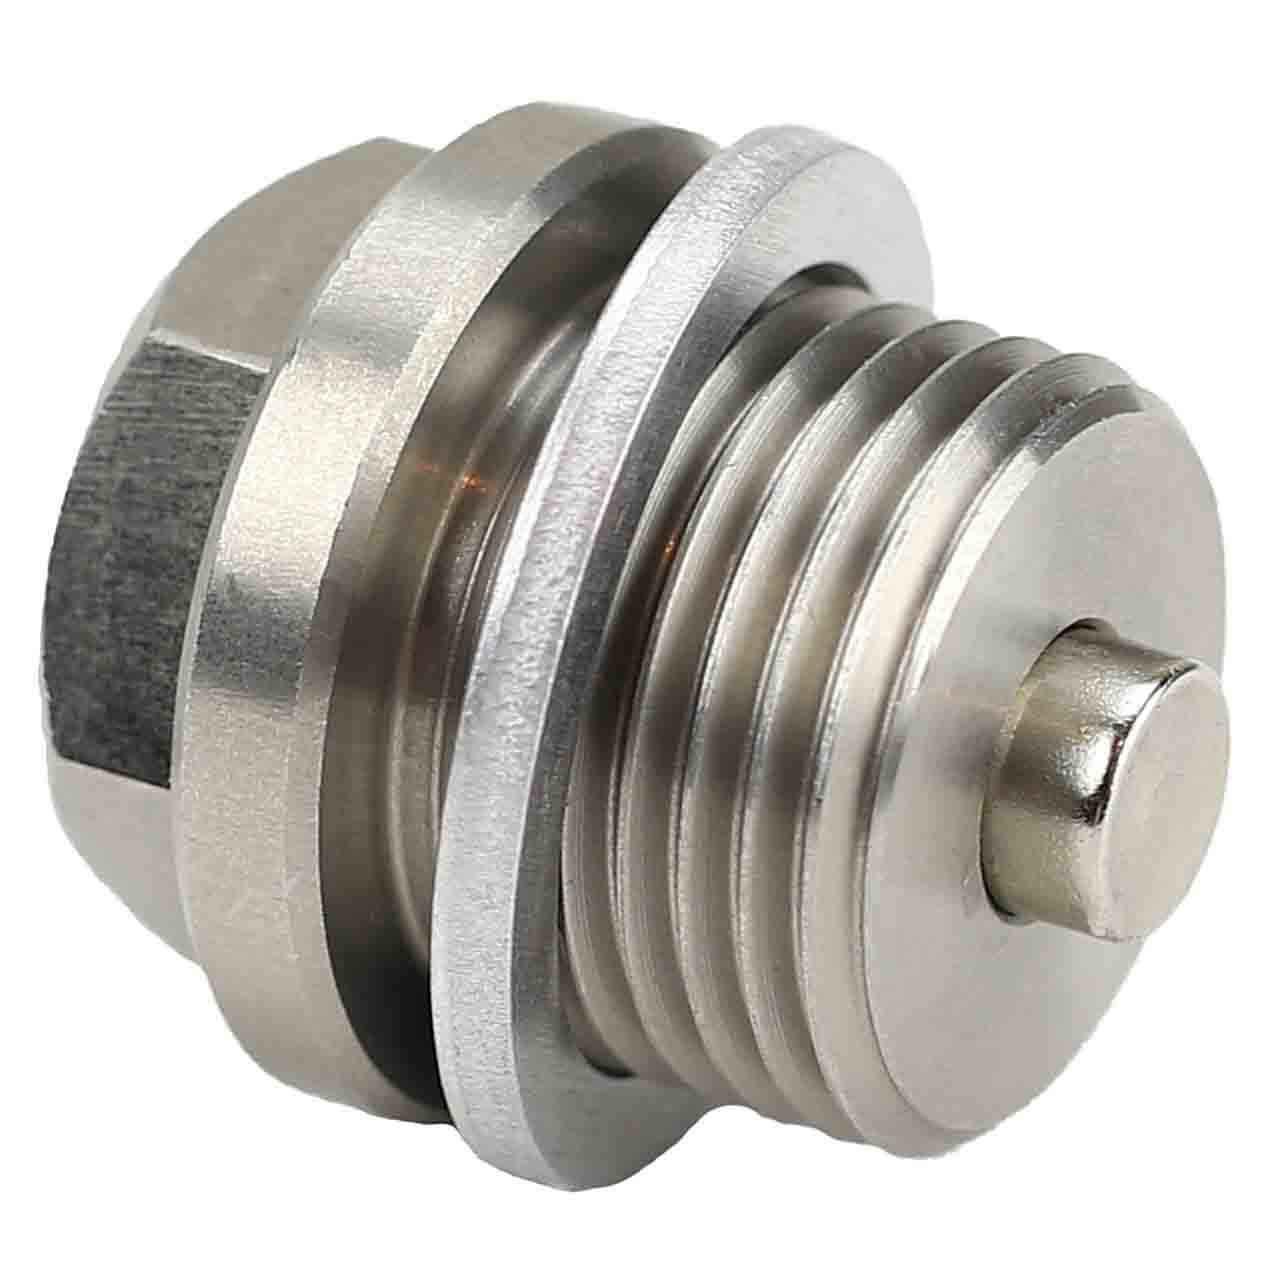 982547 for Volvo - Stainless Steel Magnetic Oil Drain Plug with Neodymium Magnet - Made In USA